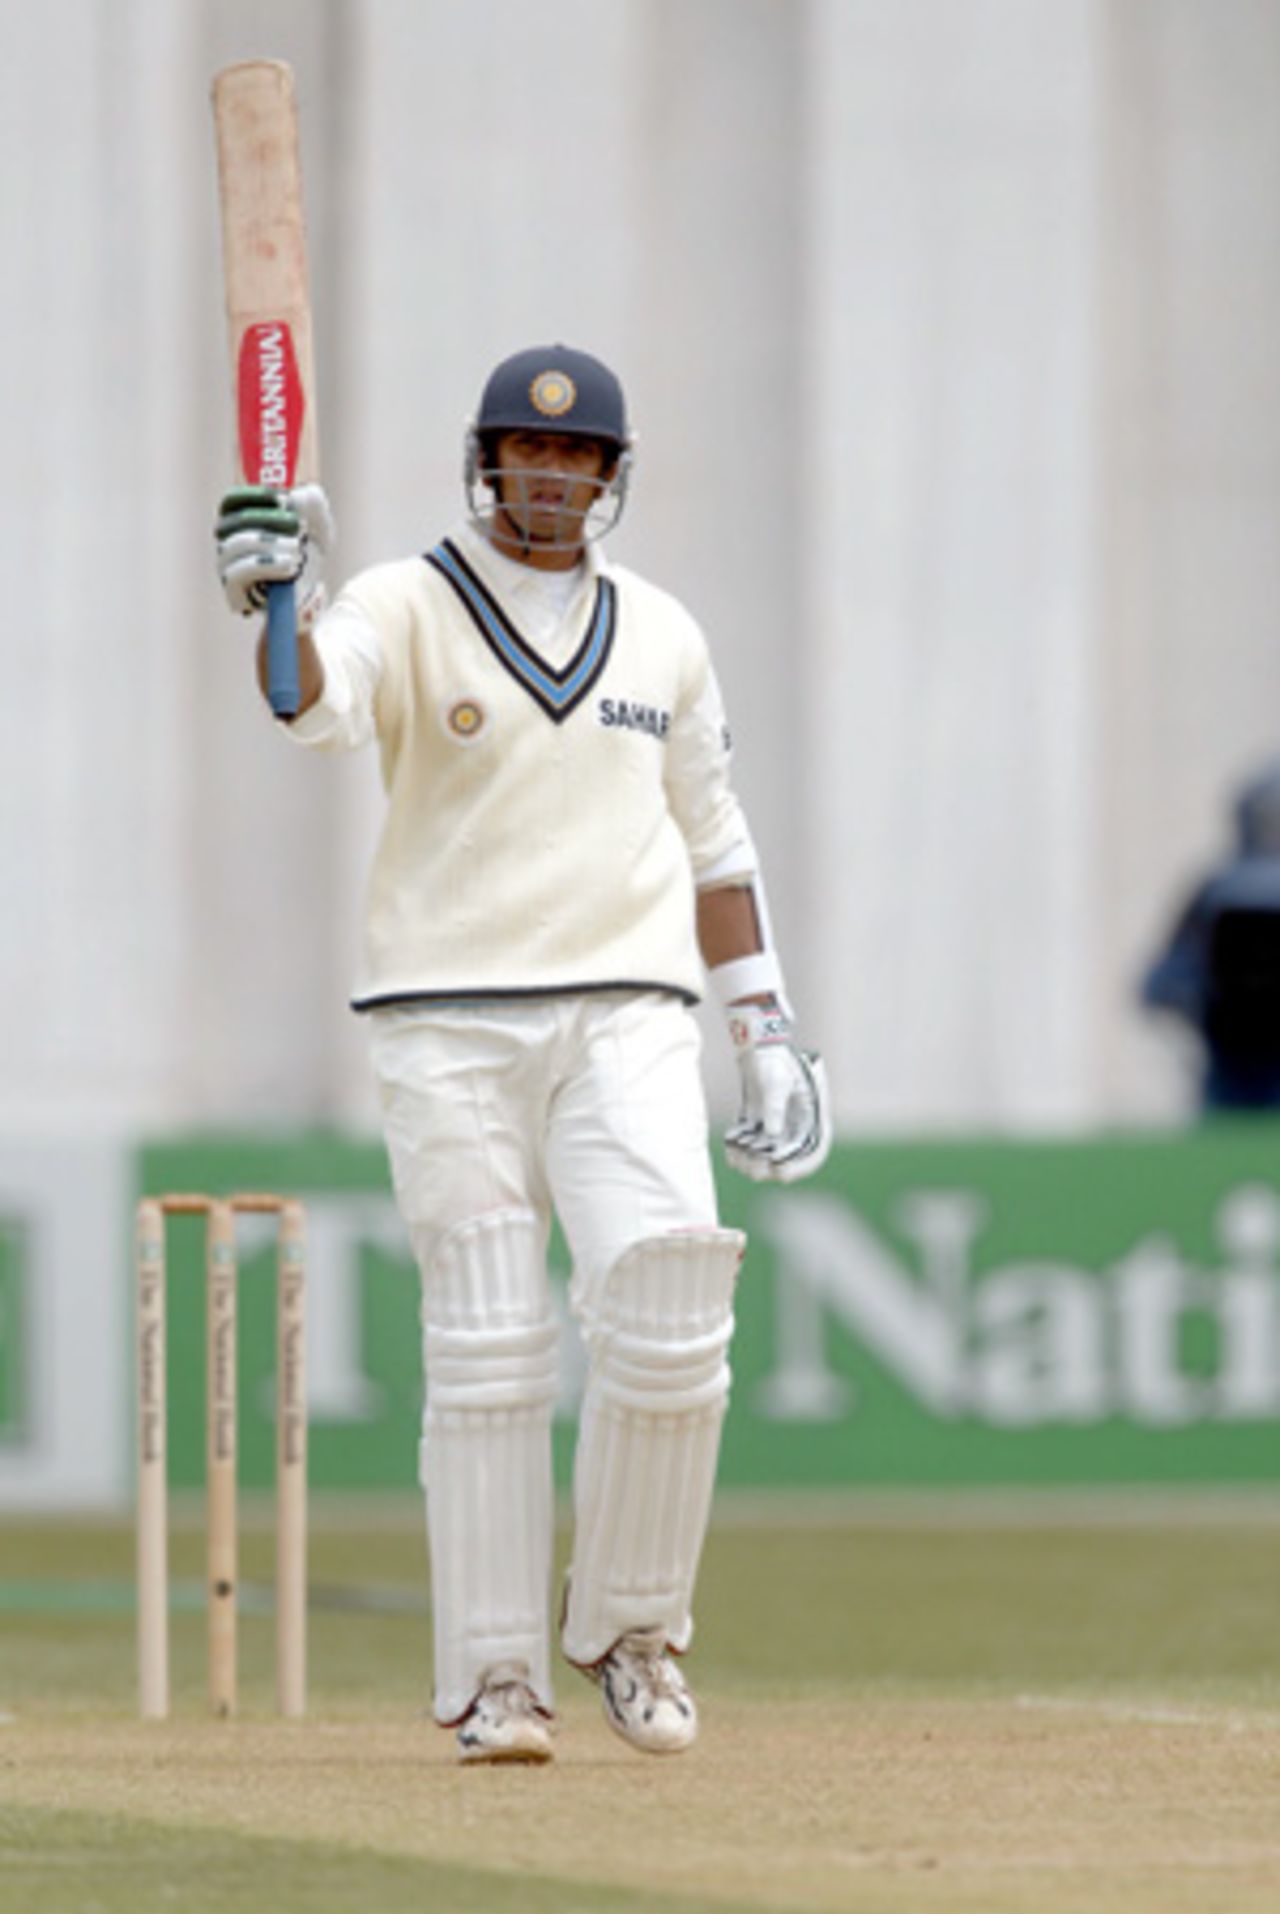 Indian batsman Rahul Dravid raises his bat to celebrate reaching his fifty in the first innings. 1st Test: New Zealand v India at Basin Reserve, Wellington, 12-16 December 2002 (12 December 2002).